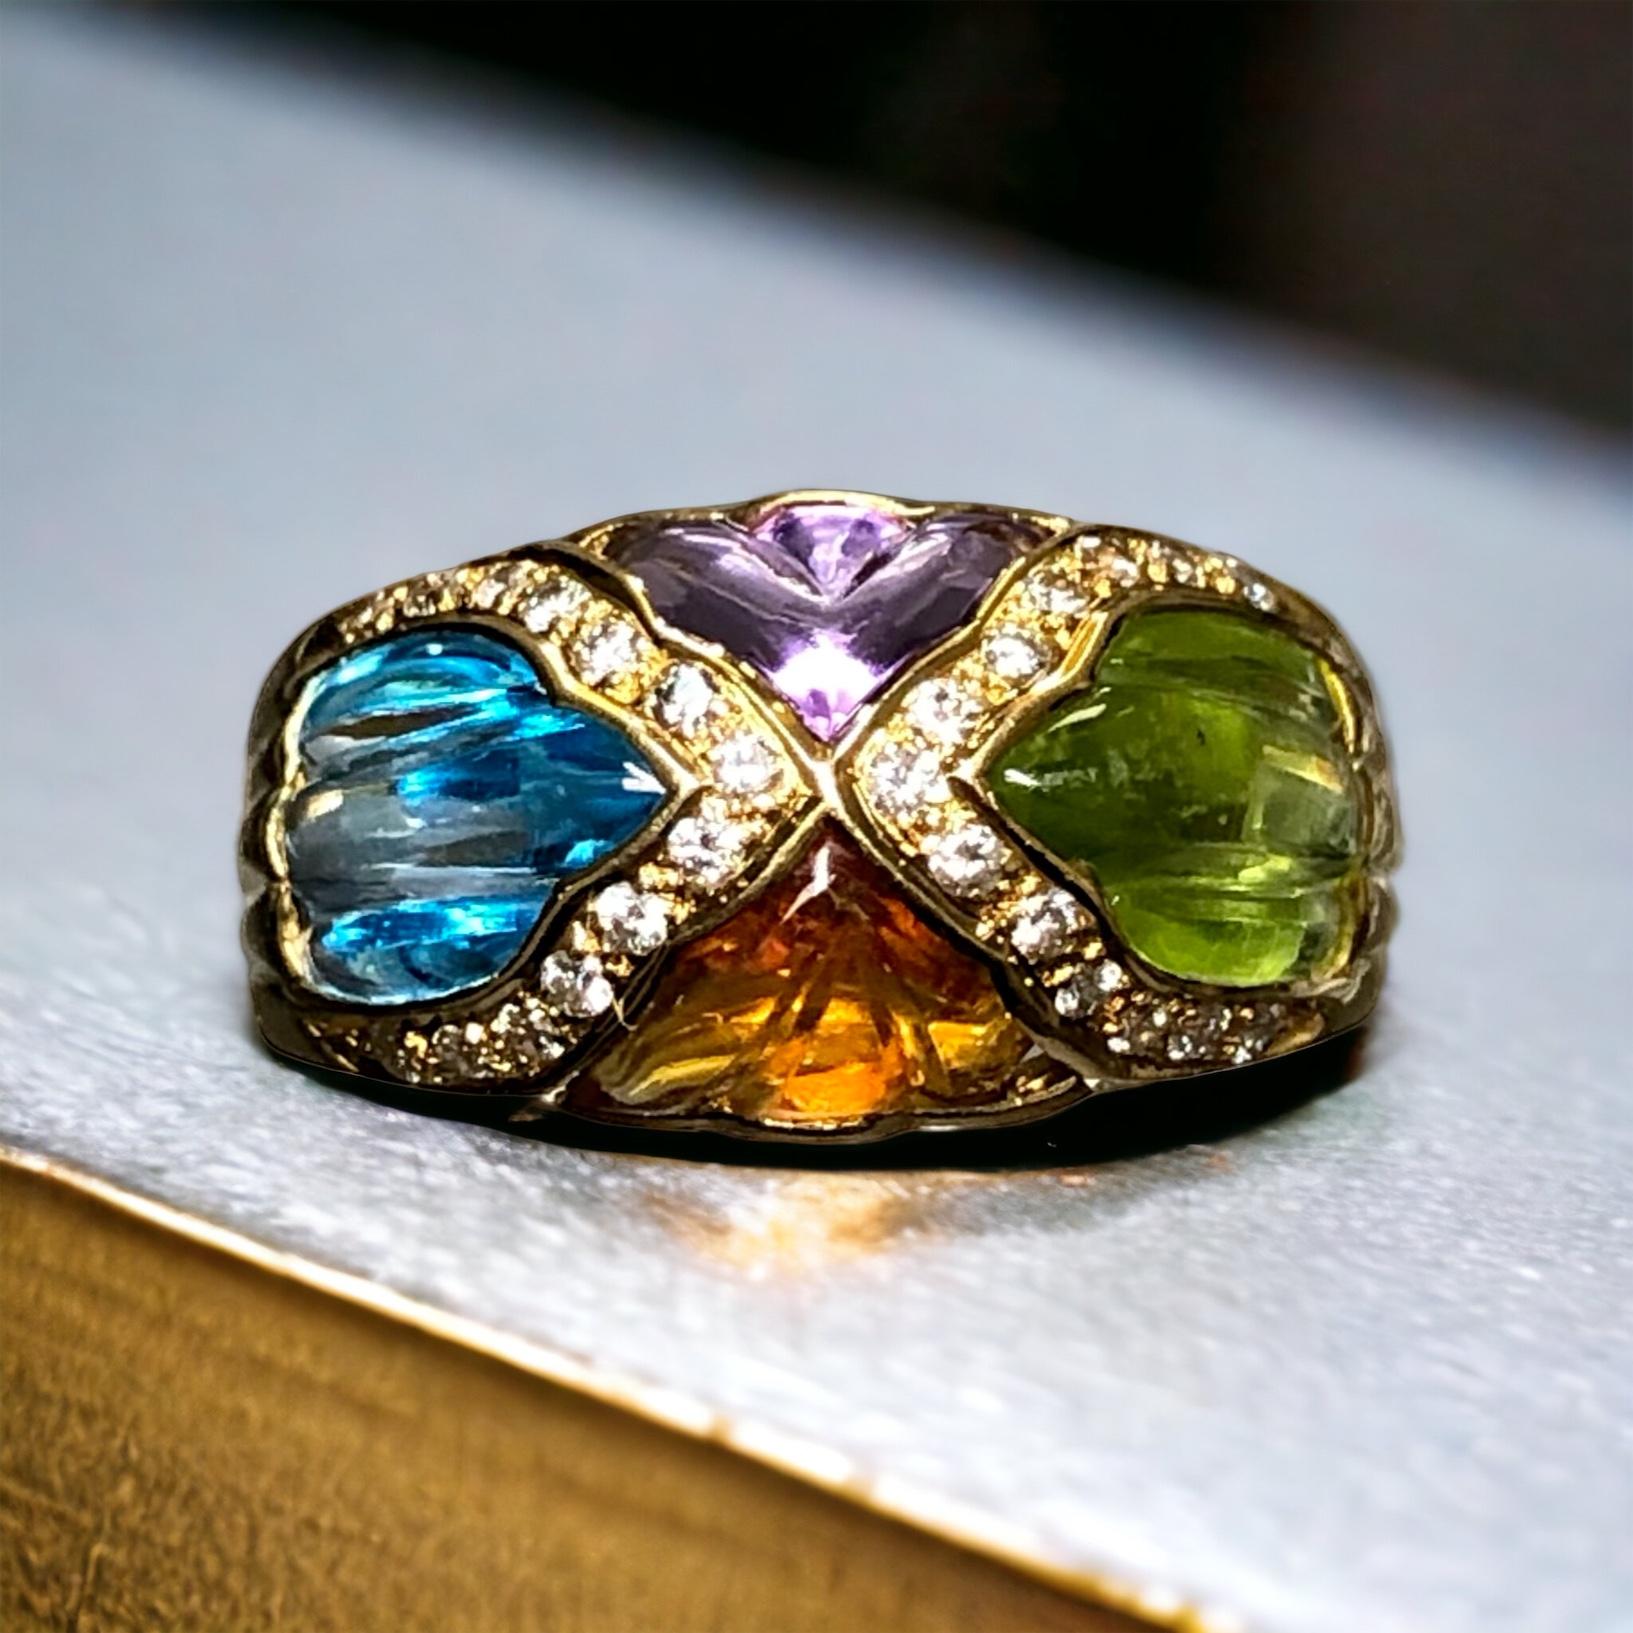 A beautiful ring done by English maker, Fred E Ullman of London c. 1993. It has been hand crafted in 18K yellow gold and flush set with natural carved/buff top amethyst, topaz, citrine and tourmaline as well as approximately .26cttw in G-I Vs